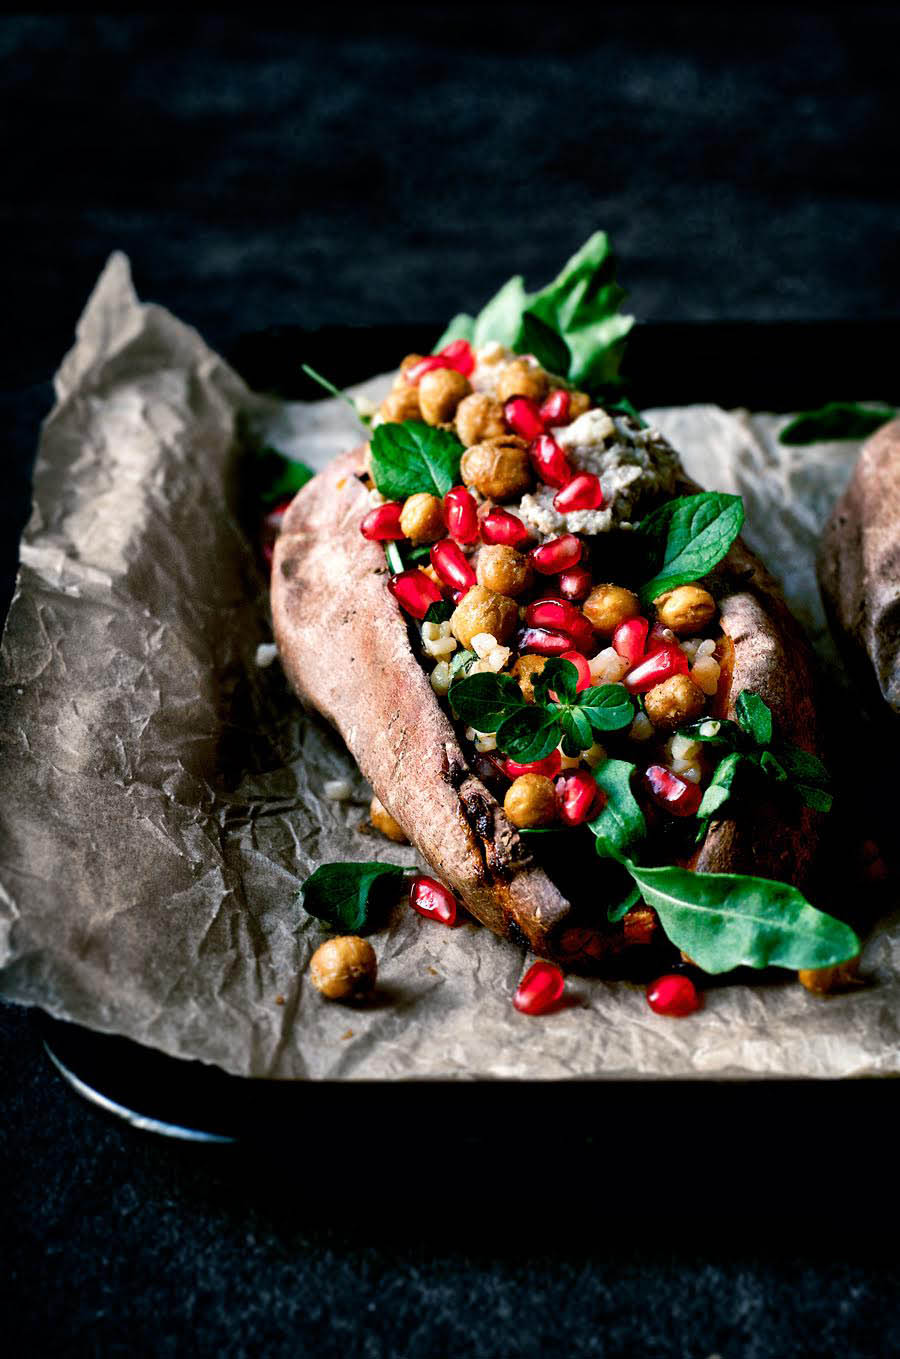 Front view of a stuffed sweet potato with pomegranate.